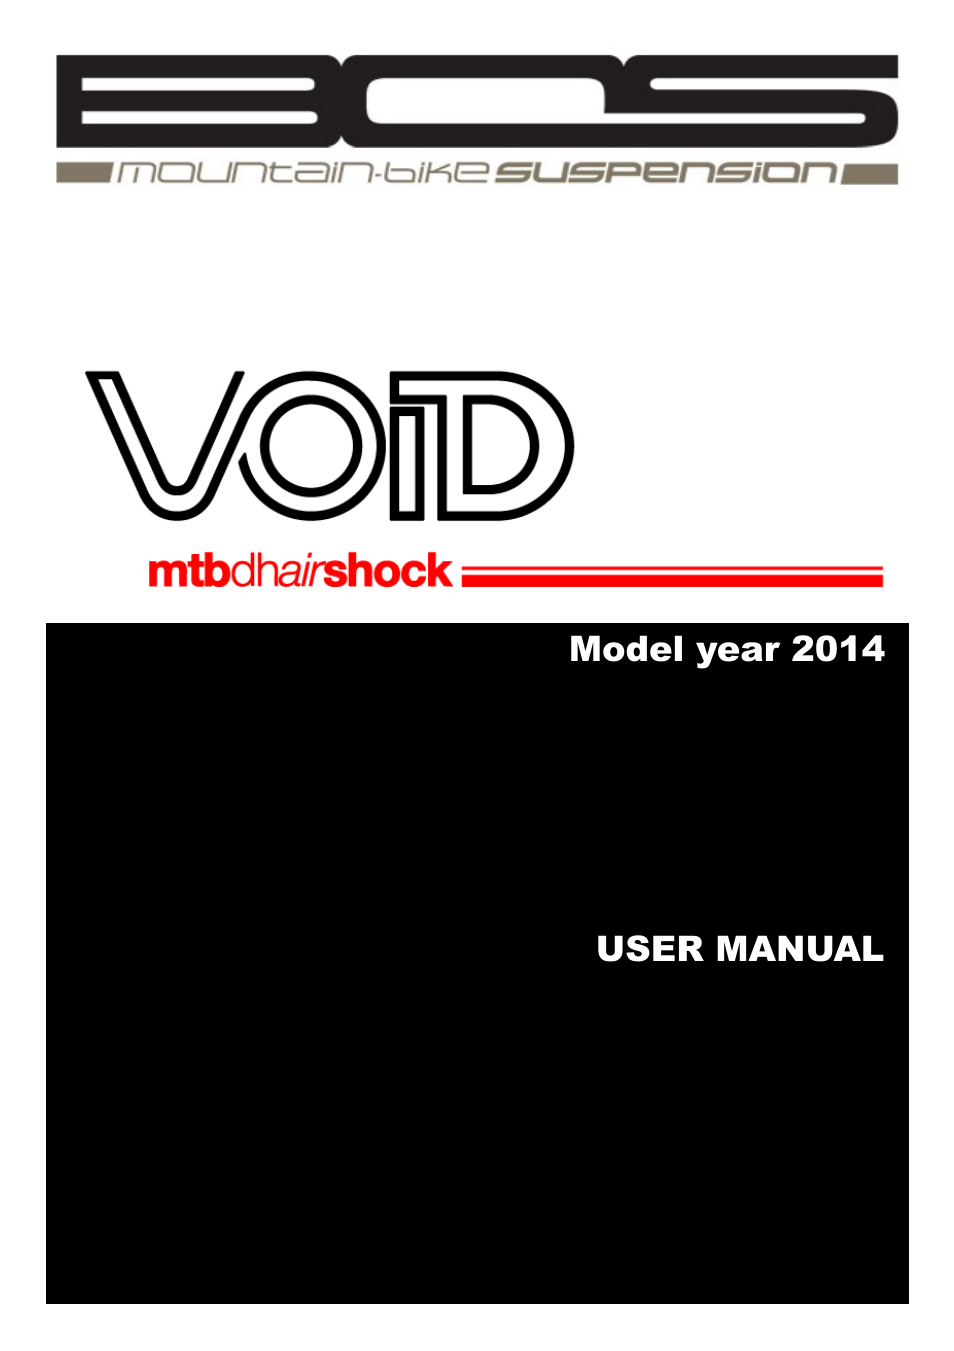 VOID 2014 User manual